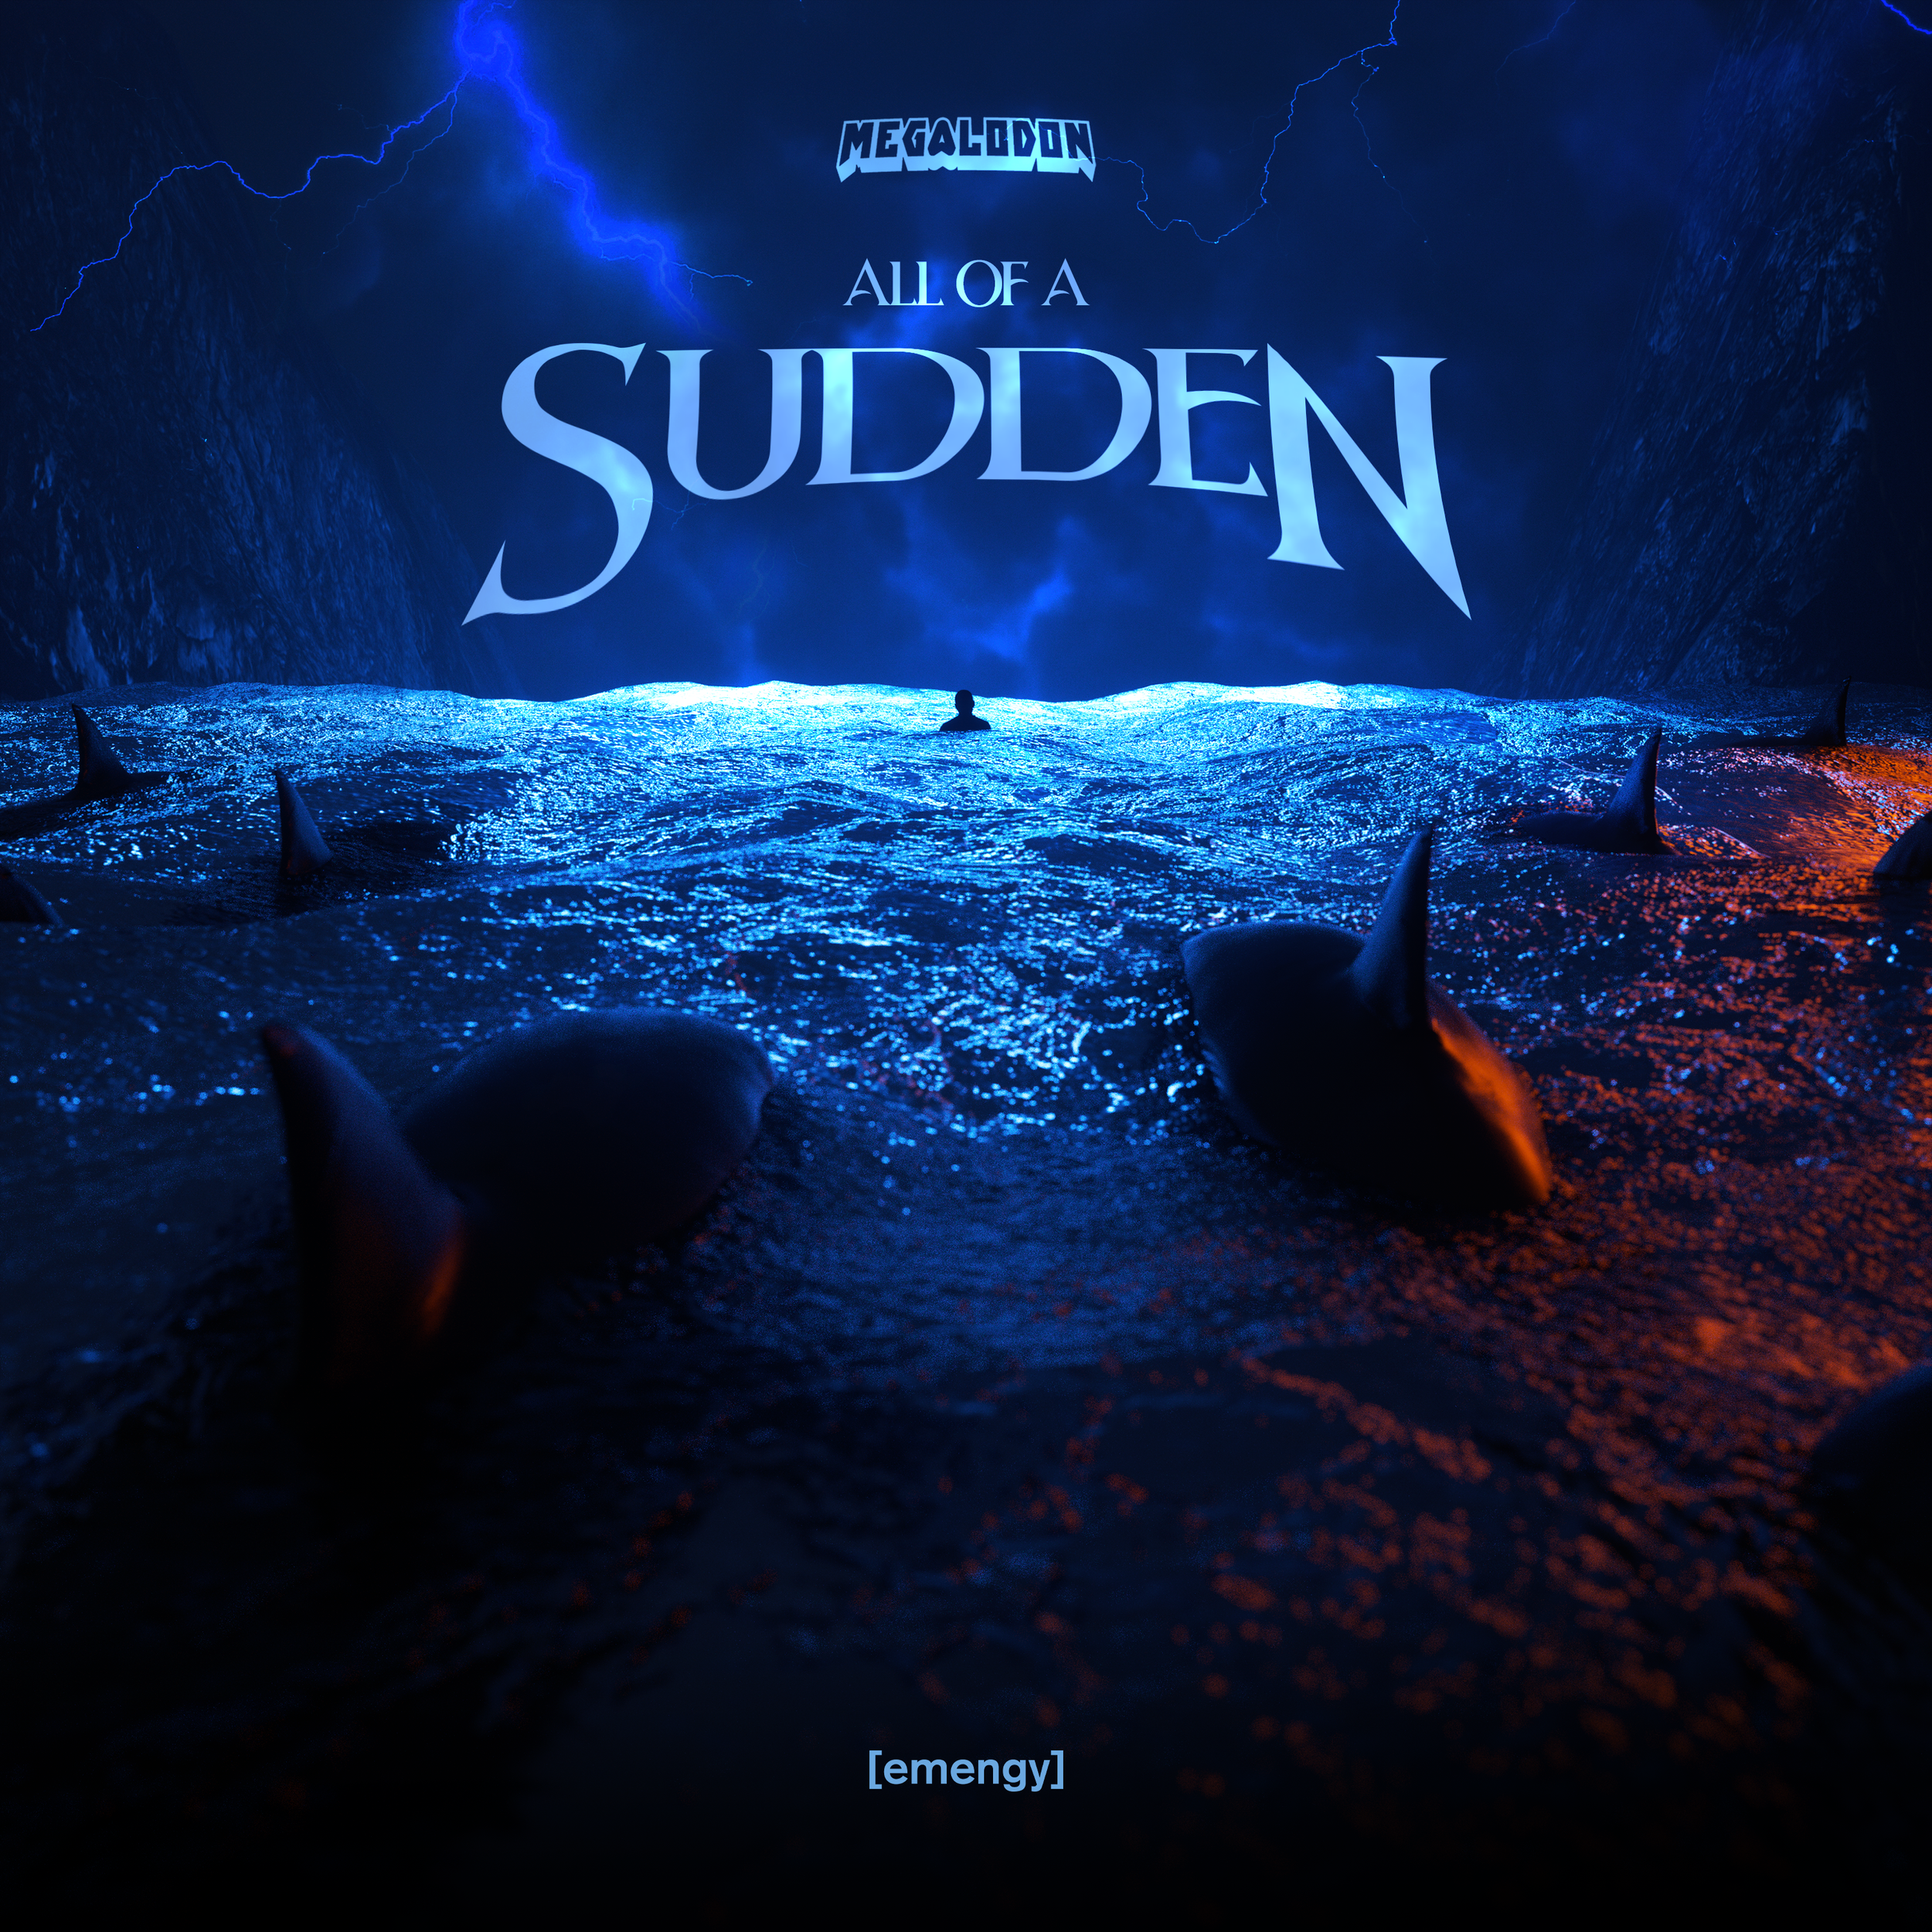 Megalodon - All Of A Sudden (COVER ART).png